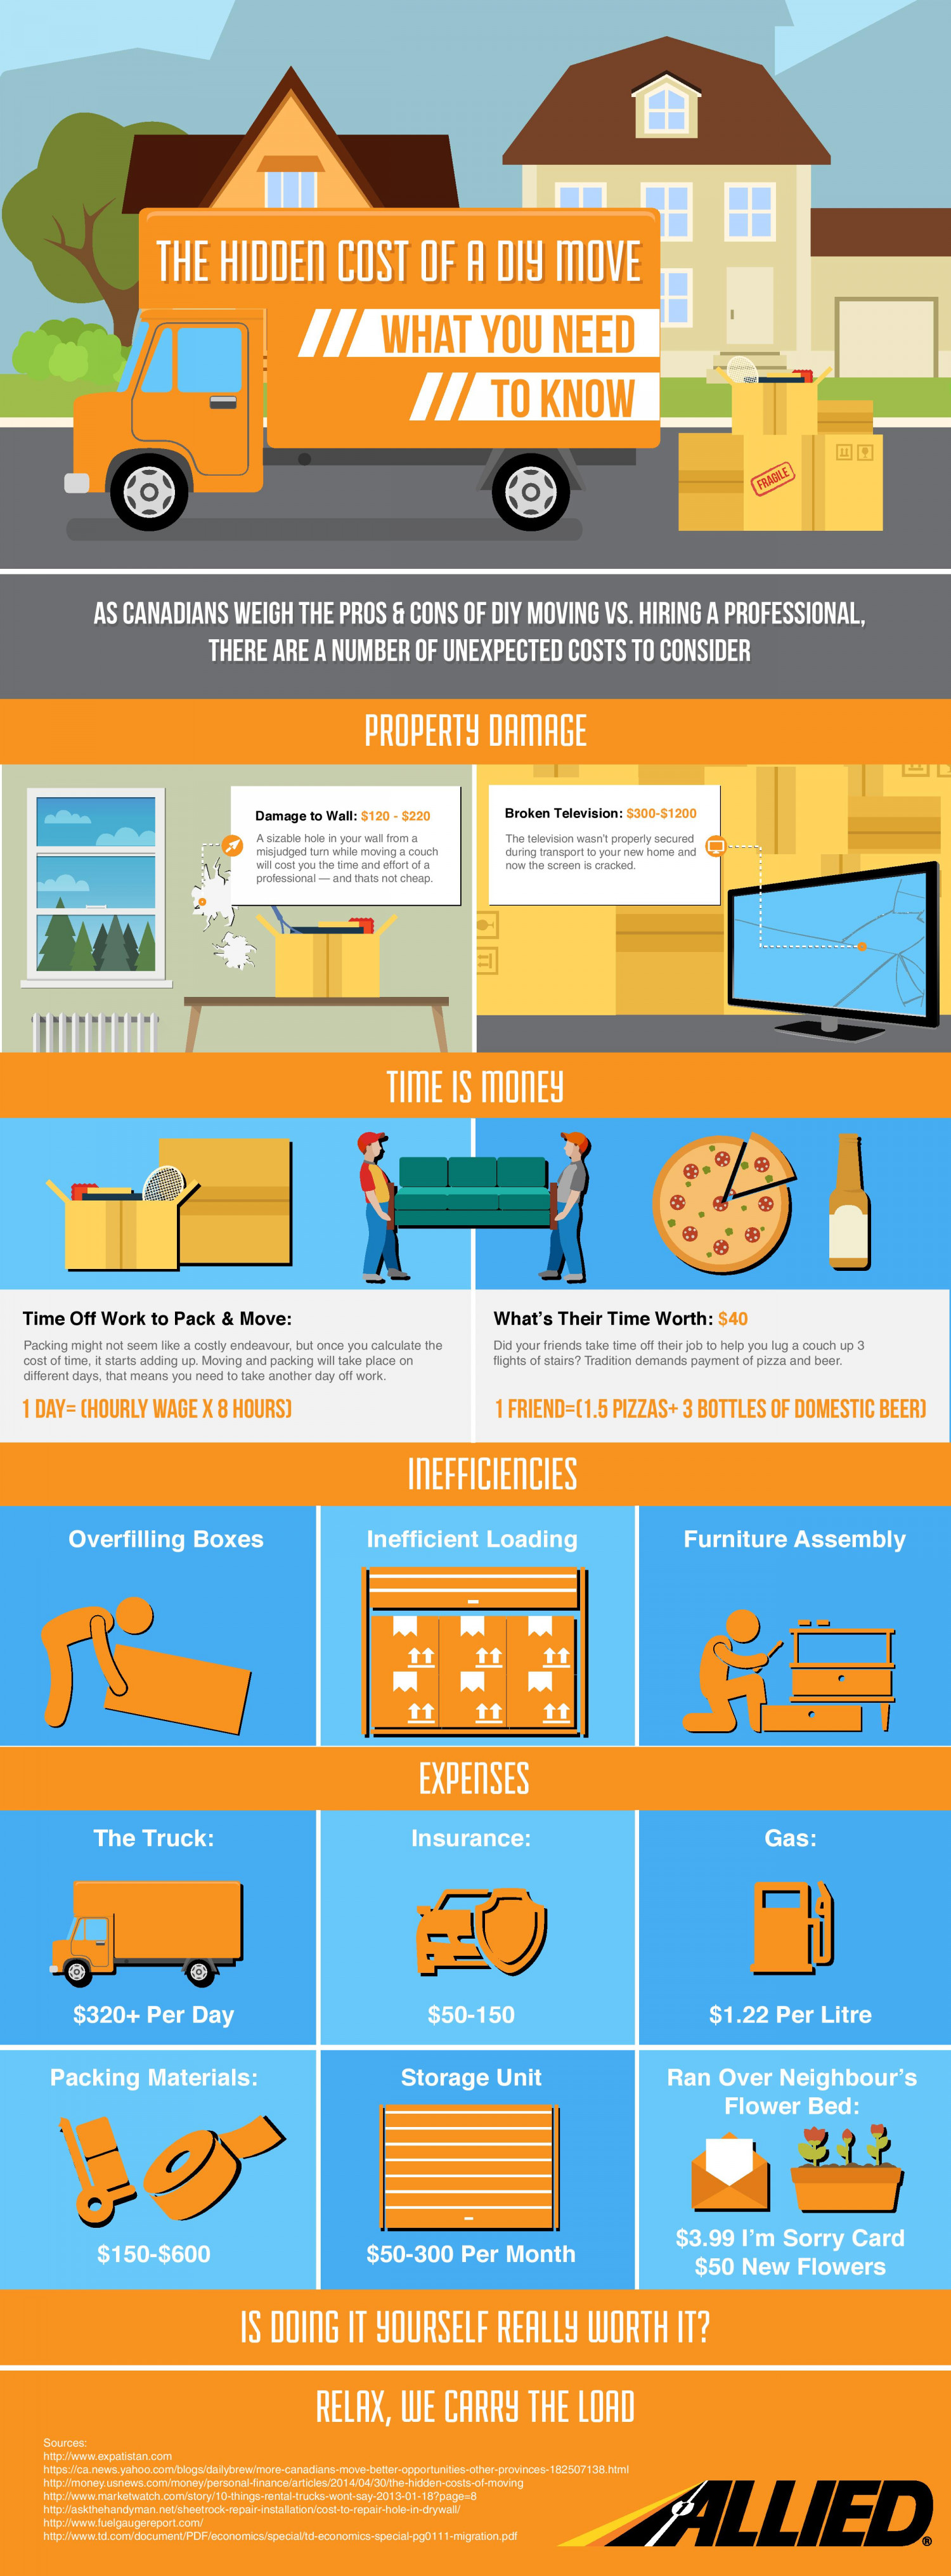 The Hidden Costs of a DIY Move Infographic